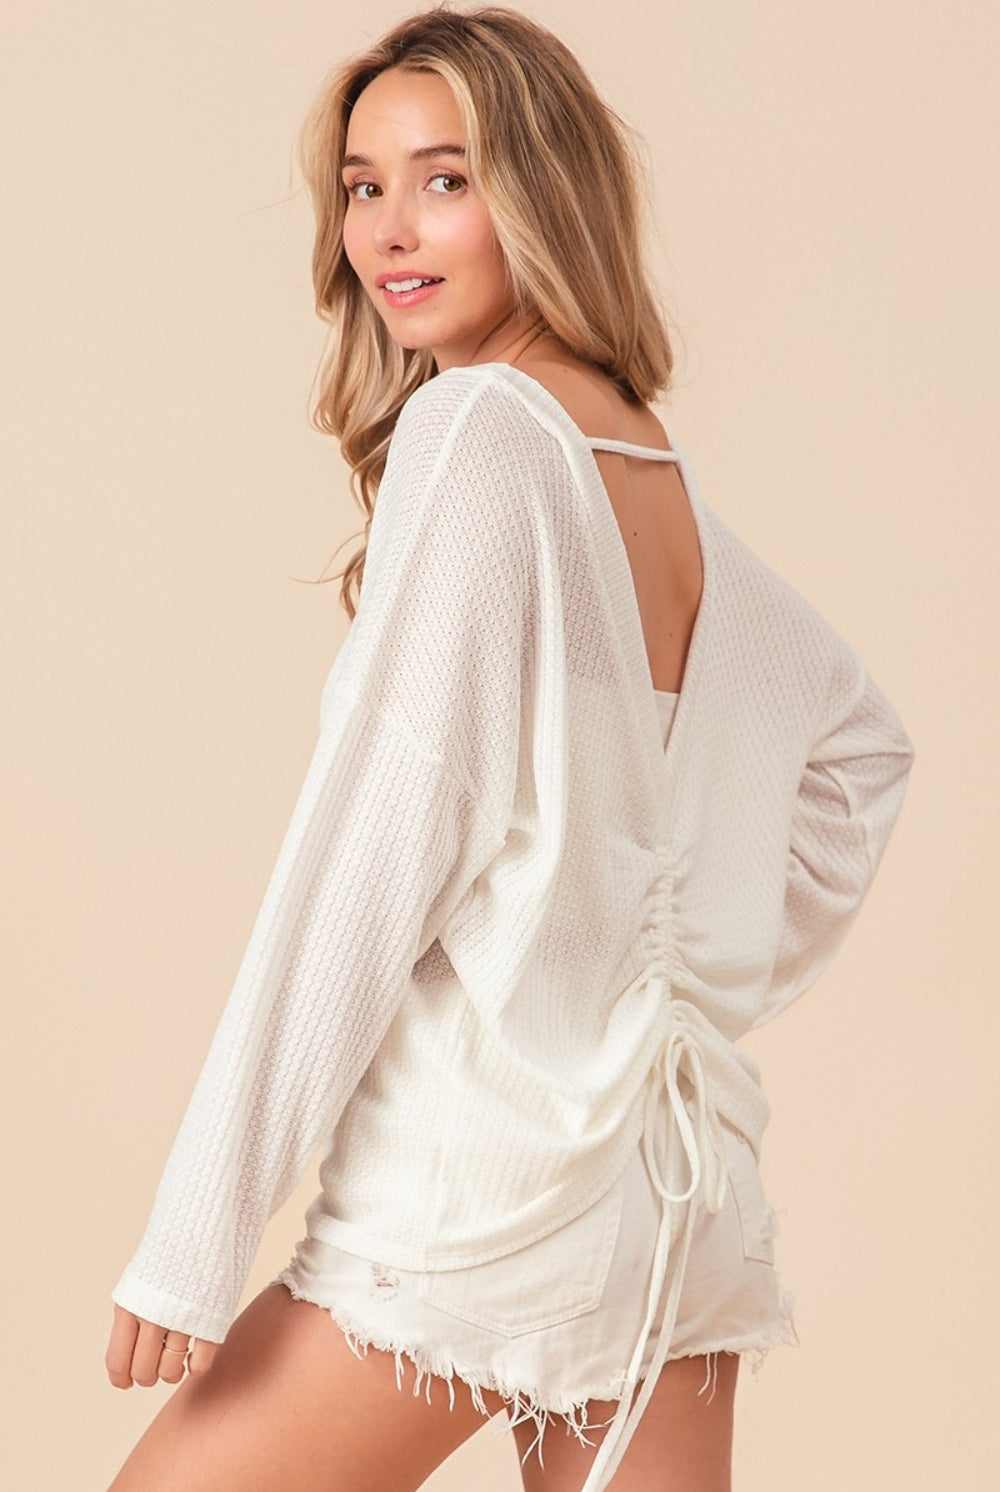 A relaxed-fit, waffle-knit top with long sleeves and an adjustable tie-back detail, blending comfort with a hint of allure.